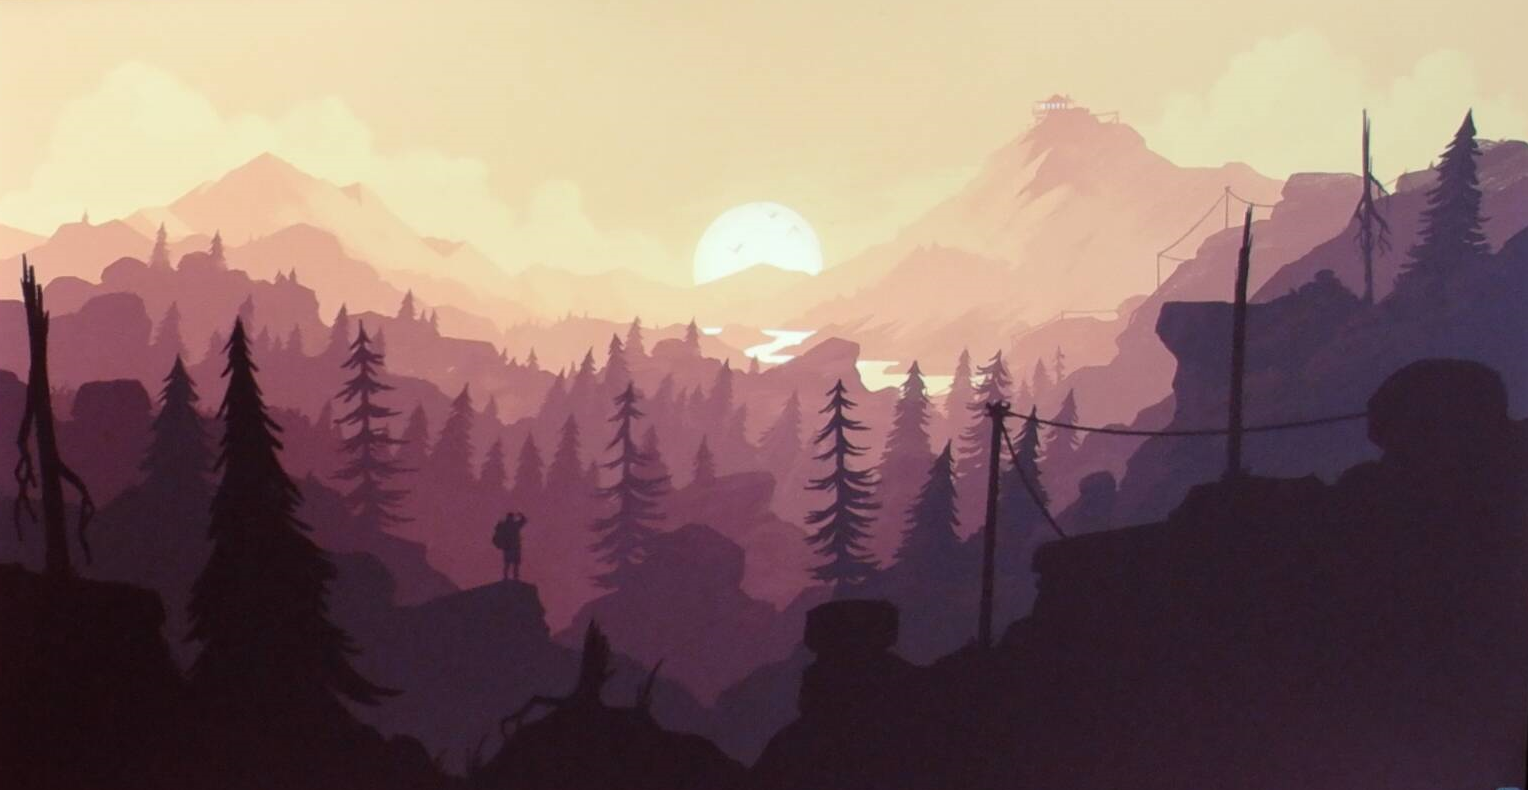 Does Anyone Know Where I Can Find This Wallpaper - Firewatch Desktop Background , HD Wallpaper & Backgrounds